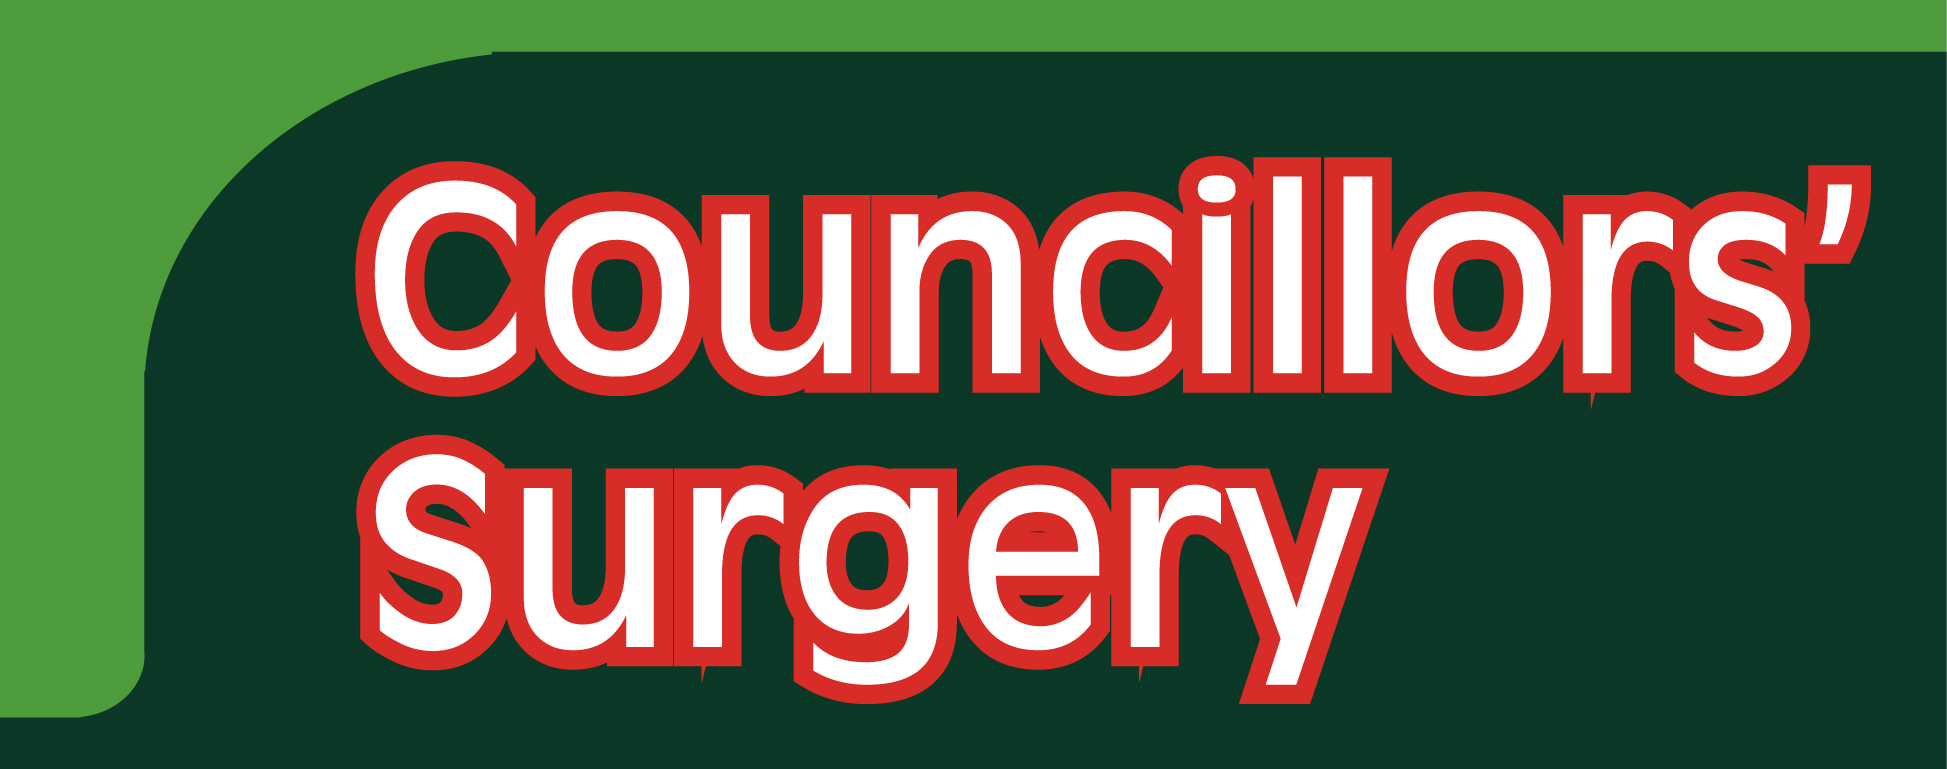 Councillors’ Surgeries – Shafto, Central and Neville Ward